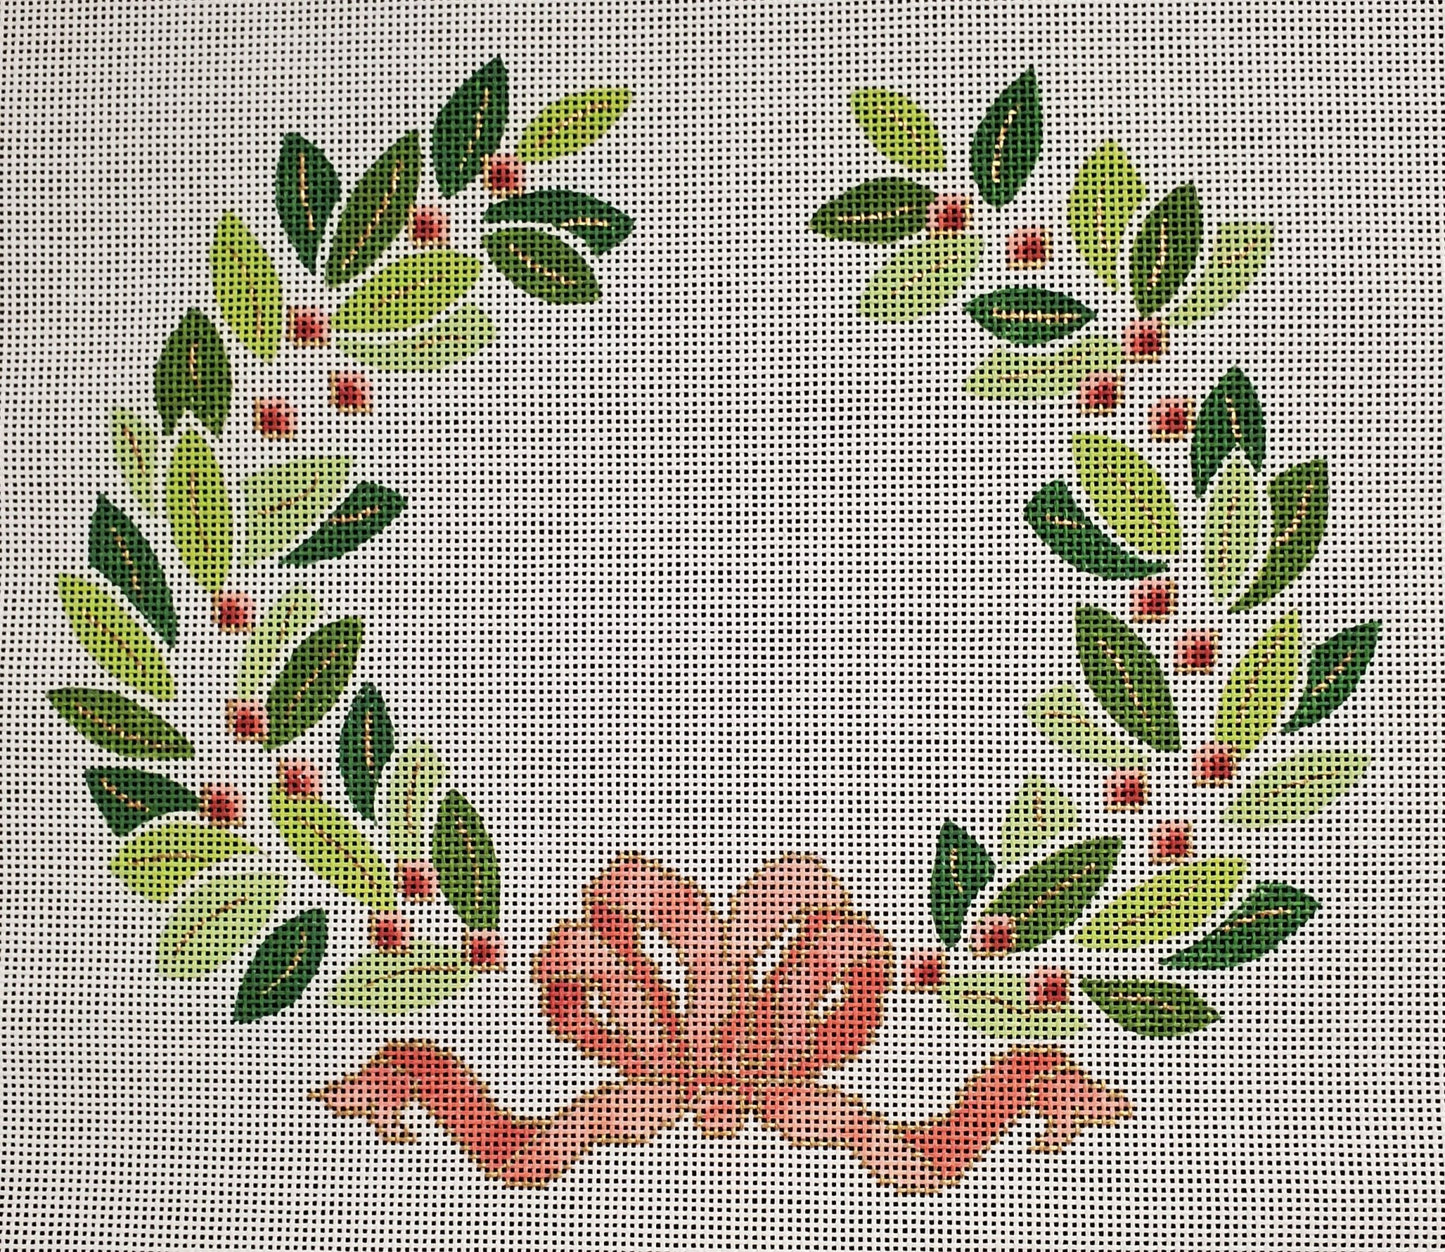 Olive Wreath w/Coral Ribbon - 13 Mesh - The Flying Needles